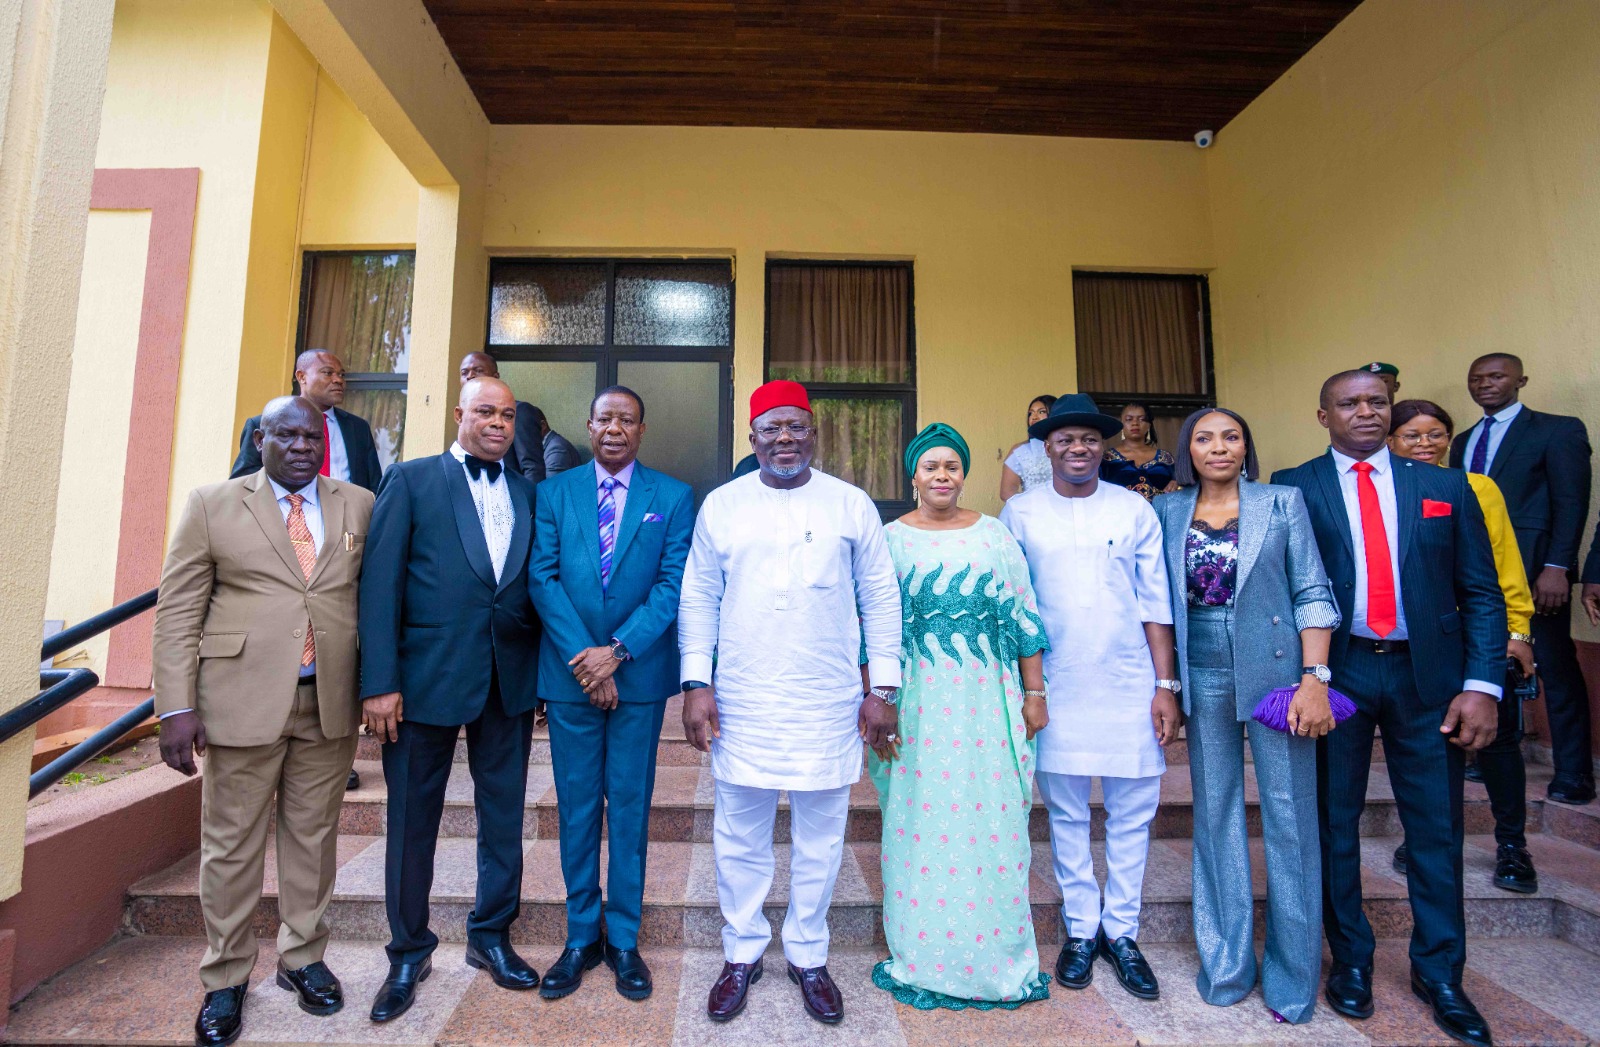 Delta Governor, Rt. Hon. Sheriff Oborevwori (4th left), his wife, Deaconess Tobore Oborevwori (4th right), Speaker, DTHA, Rt. Hon. Emomotimi Guwor (3rd right), and the Chairman, Delta State Board of Internal Revenue, Hon. Solomon Ighrakpata (3rd left), Barr. Frank Nwugo (2nd left), Mr. Collins Iwebunor (left), Hon. Mrs Orezi Esievo (2nd right) and Mr. Kelly Oghenekevwe (right) shortly after their inauguration in Government House, Asaba on Friday, July 21, 2023. (Pix Jibunor Samuel.)